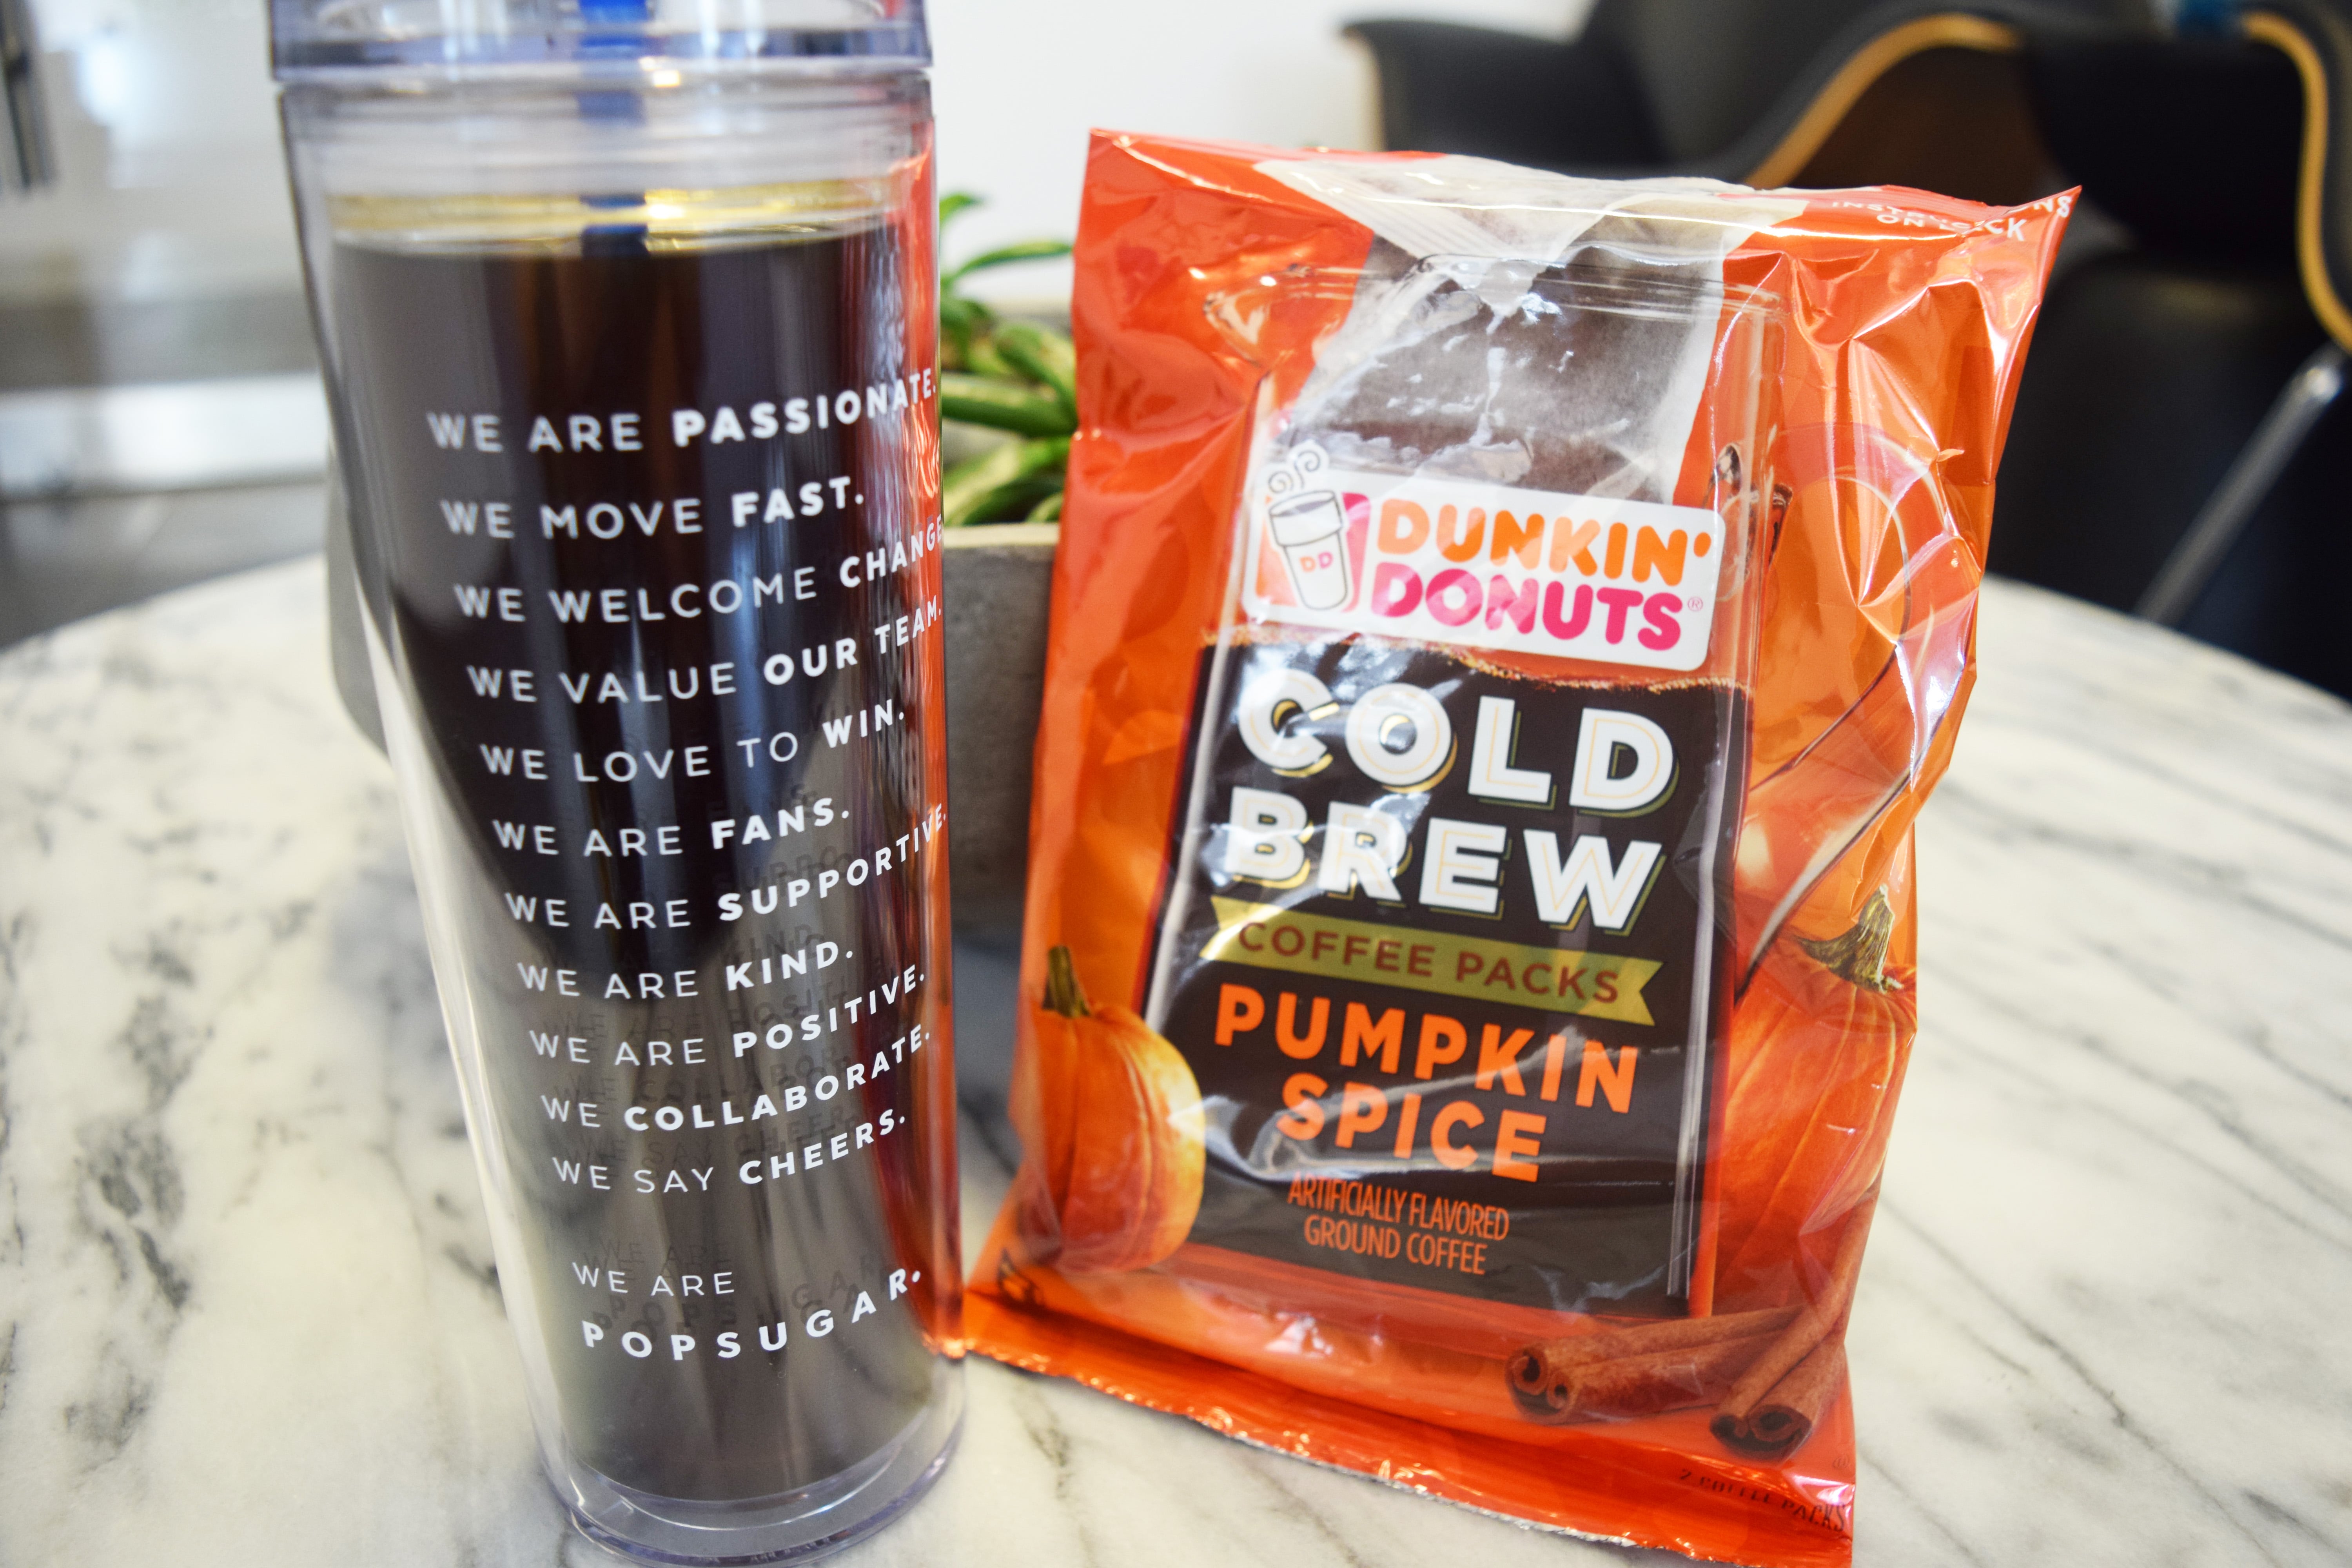 Dunkin' Donuts Cold Brew Review - Fast Food Menu Prices